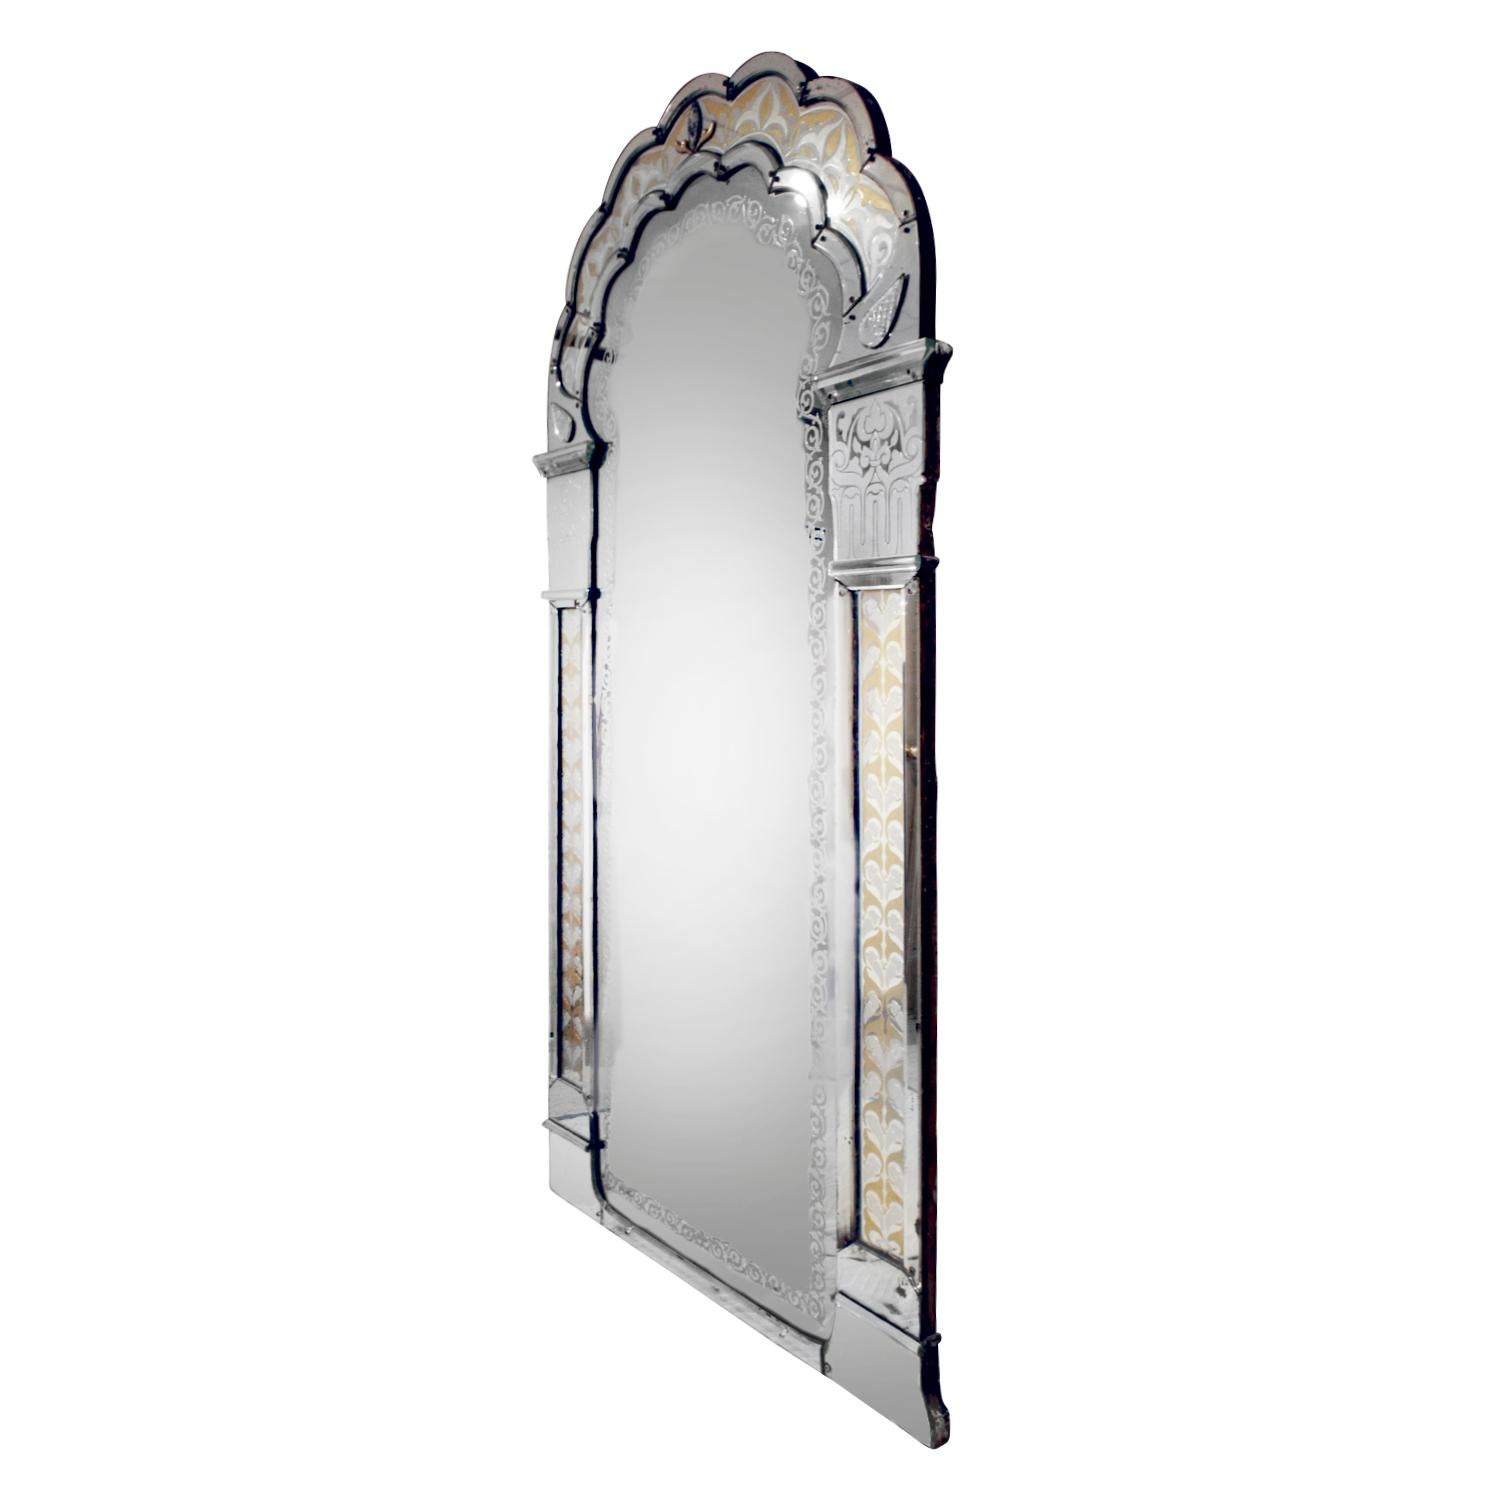 Monumental wall hanging mirror with etched and colored reverse design, Venice 19th century.

Condition: Very good, age appropriate losses, wear and patina.